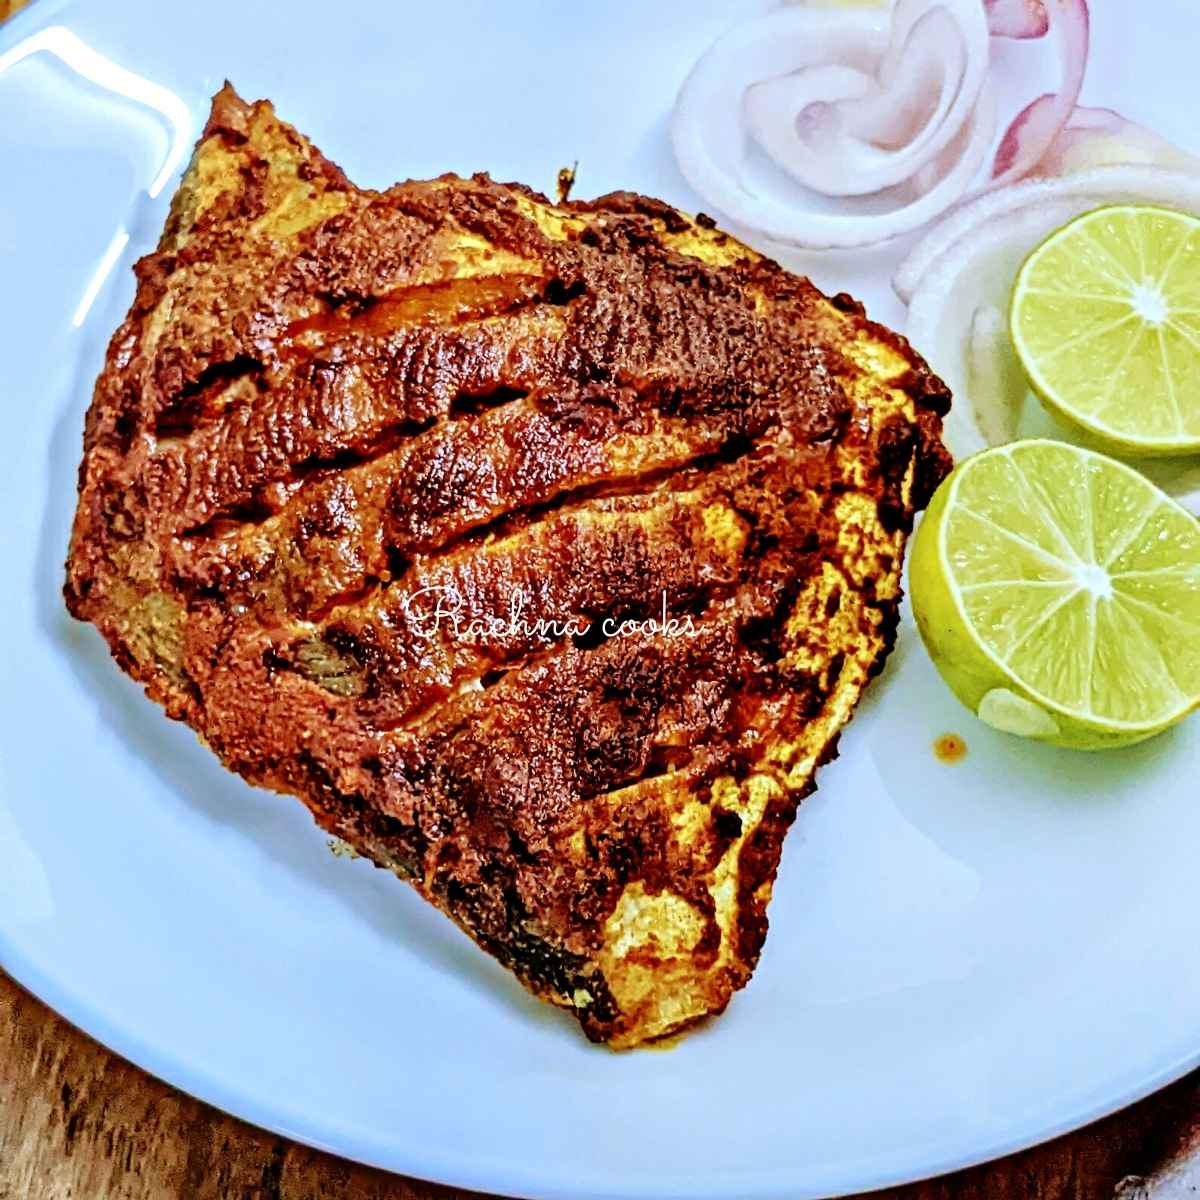 Pomfret fry in a red masala served on a white plate with lime and onion slices.